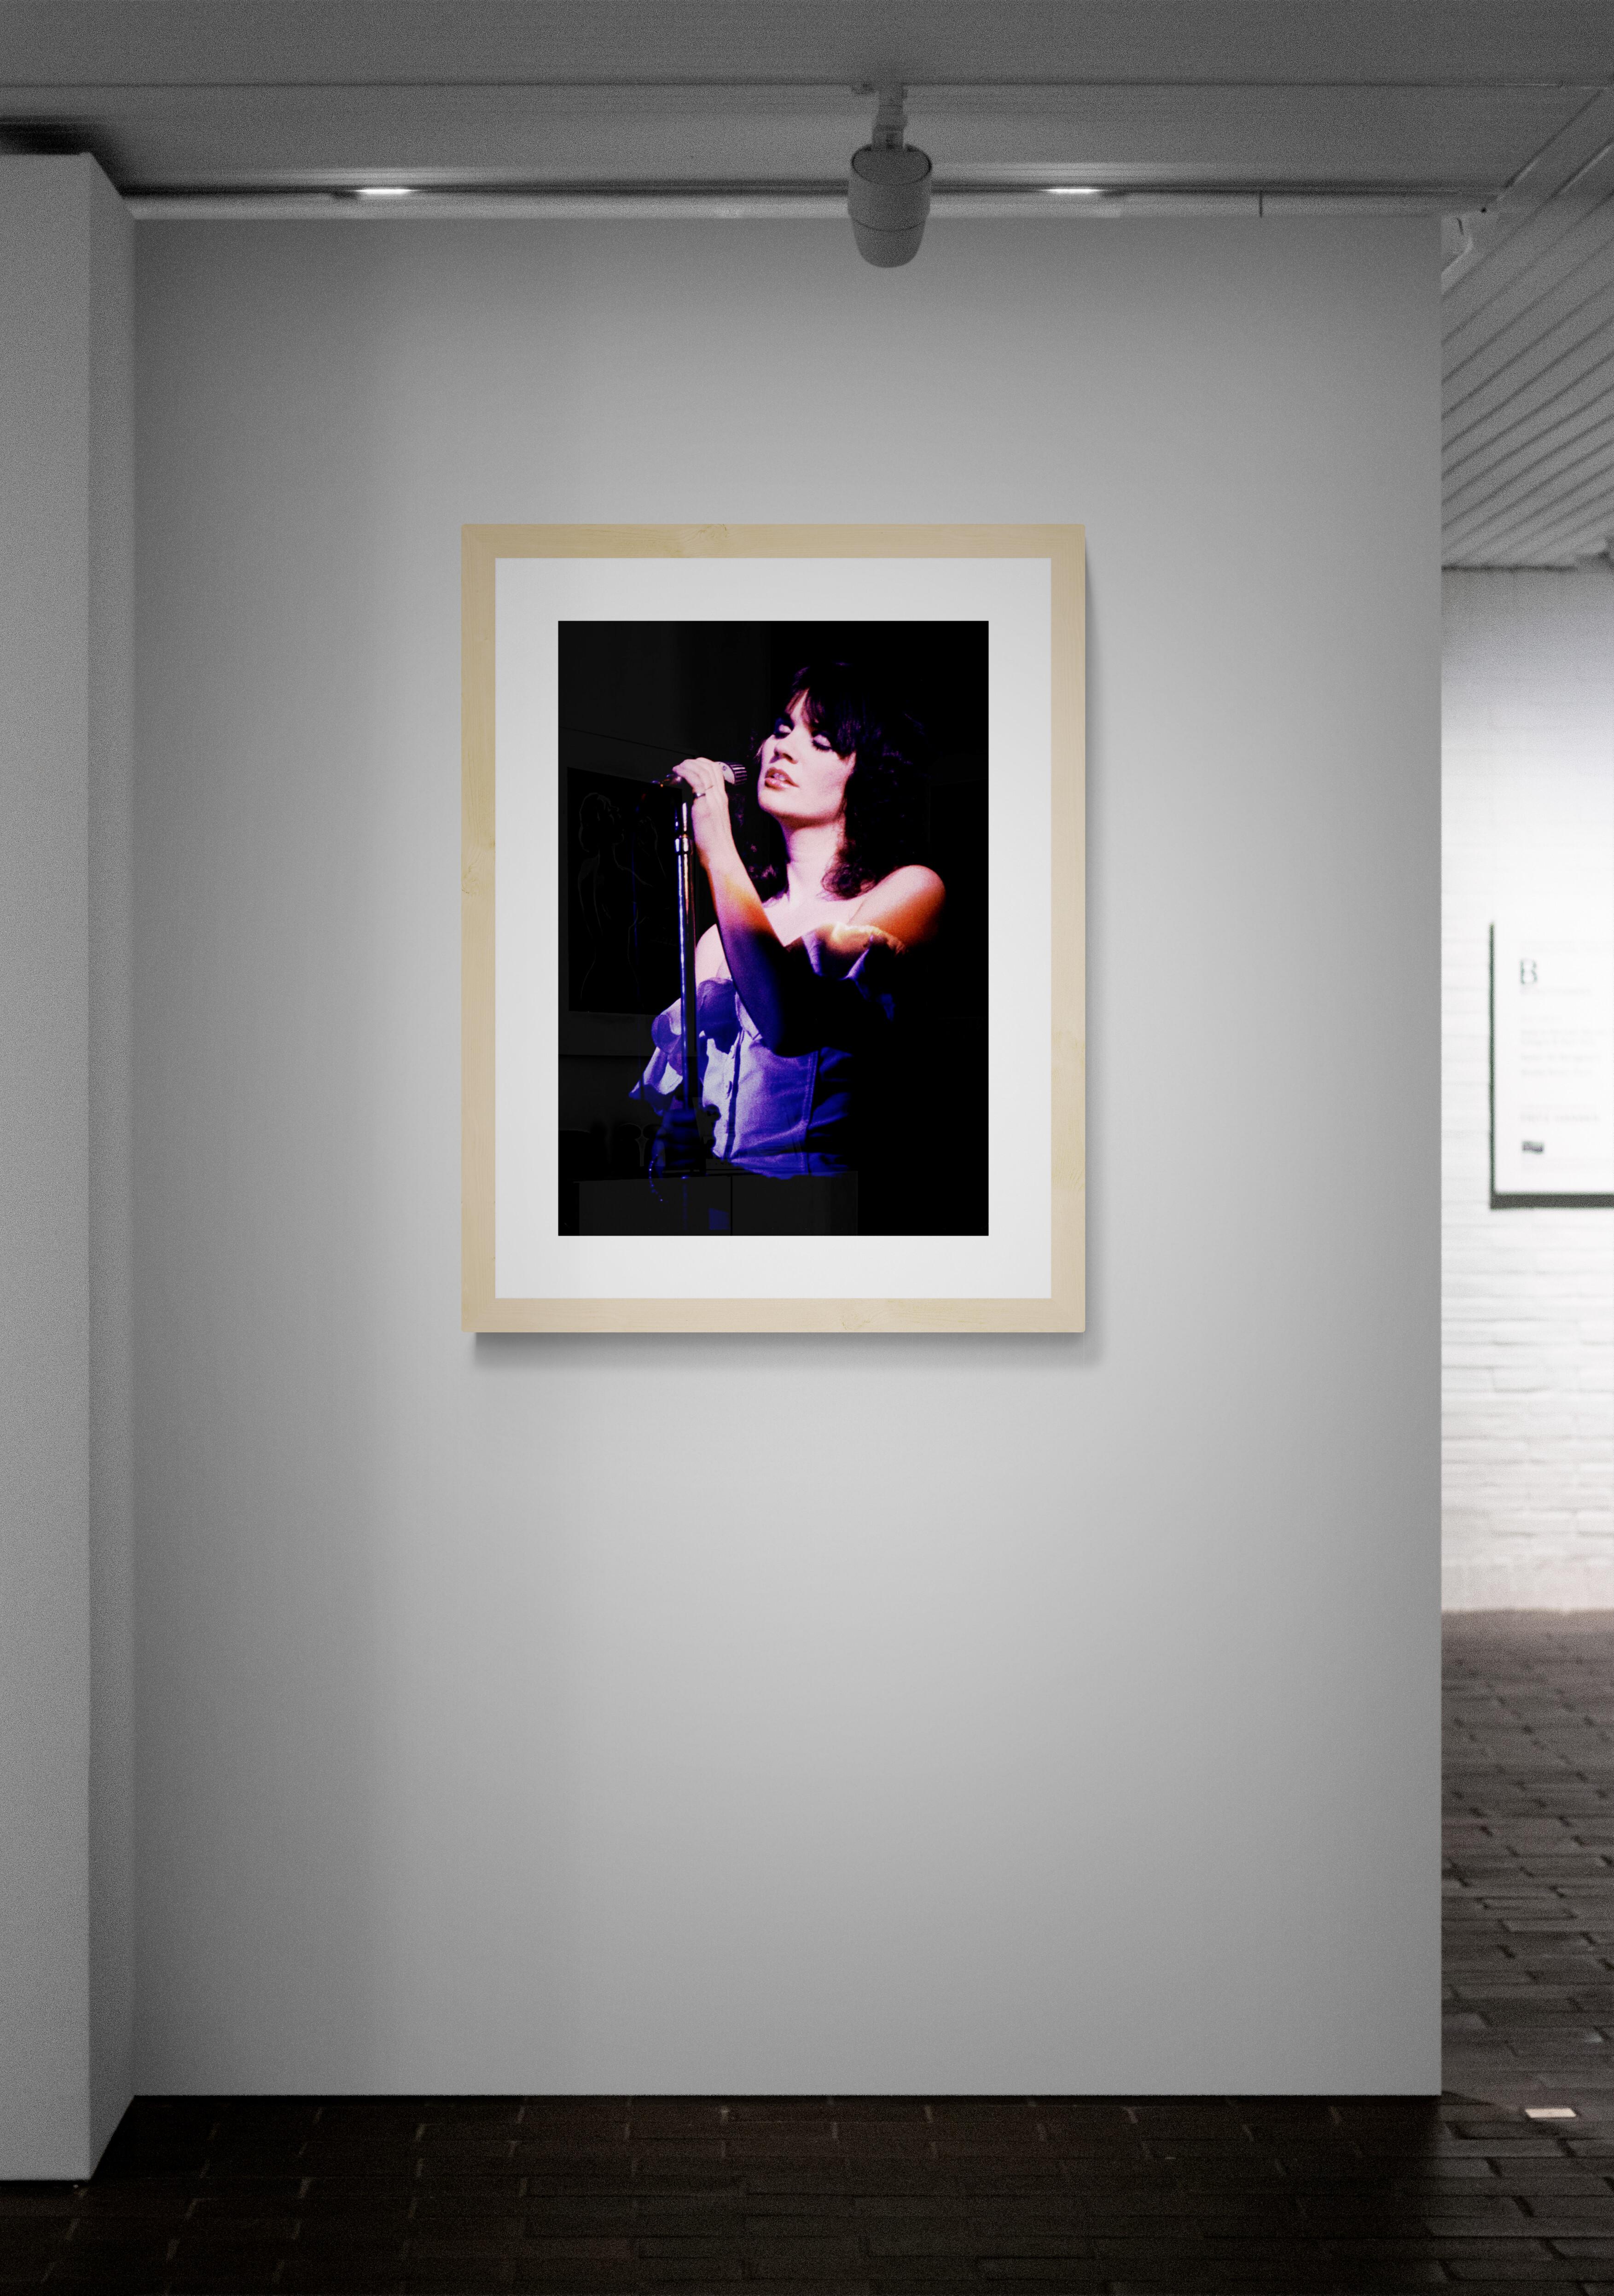 Title: Linda Ronstadt #7 Concert Photo
Artist: Richard E. Aaron
Estate Edition: Hand numbered with estate chop mark in the margin, signature stamp on verso, archival pigment print on Hahnemühle Photo Rag Pearl, 100% cotton paper fine art paper.